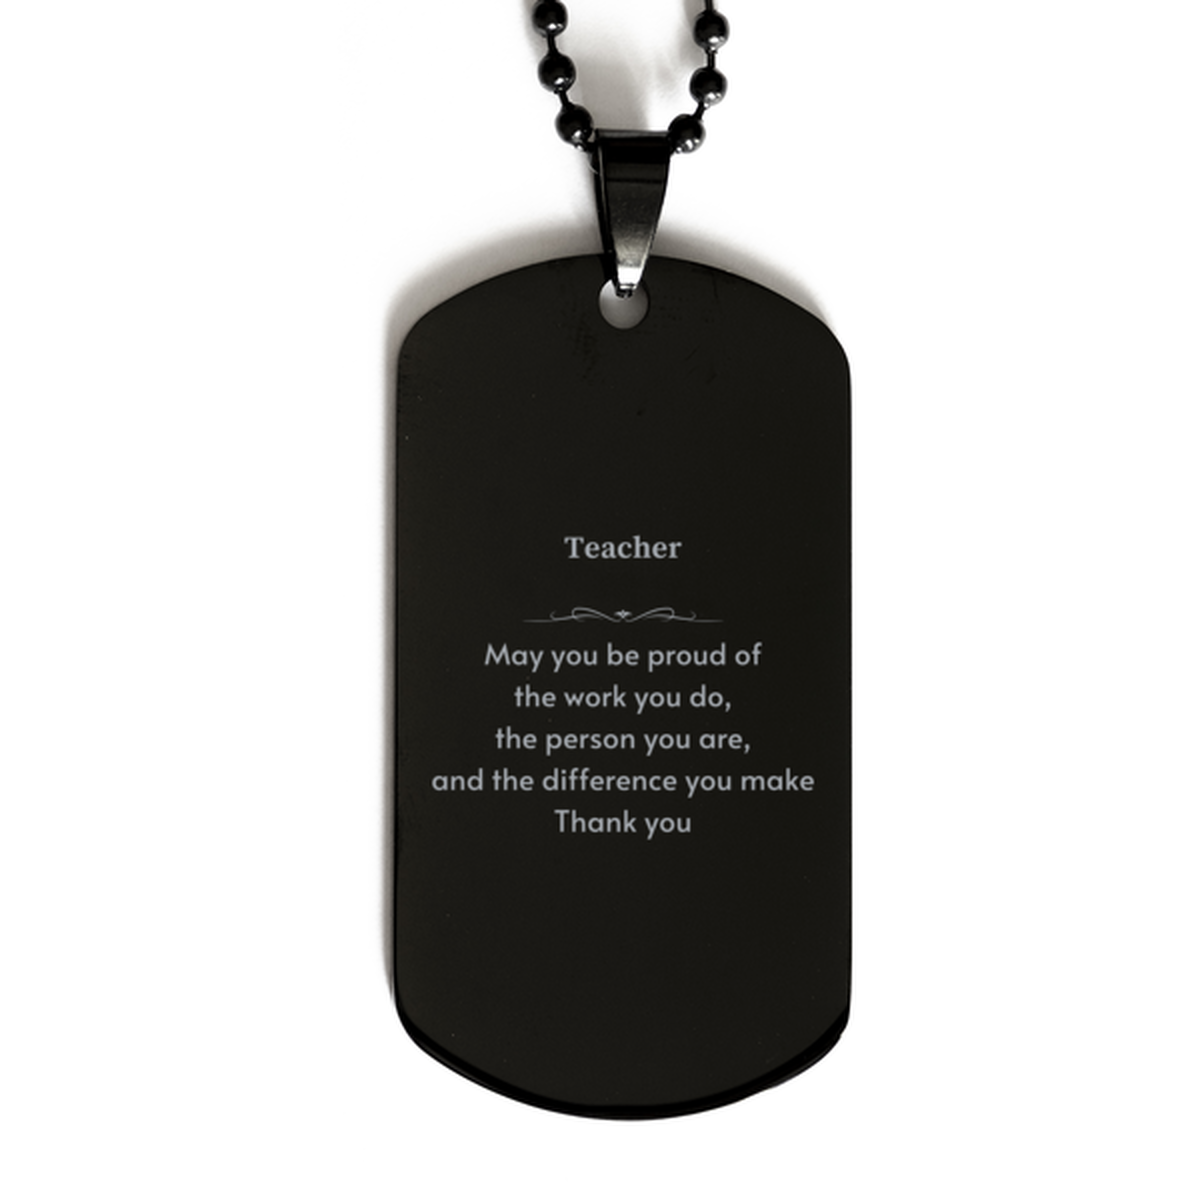 Heartwarming Black Dog Tag Retirement Coworkers Gifts for Teacher, Teacher May You be proud of the work you do, the person you are Gifts for Boss Men Women Friends